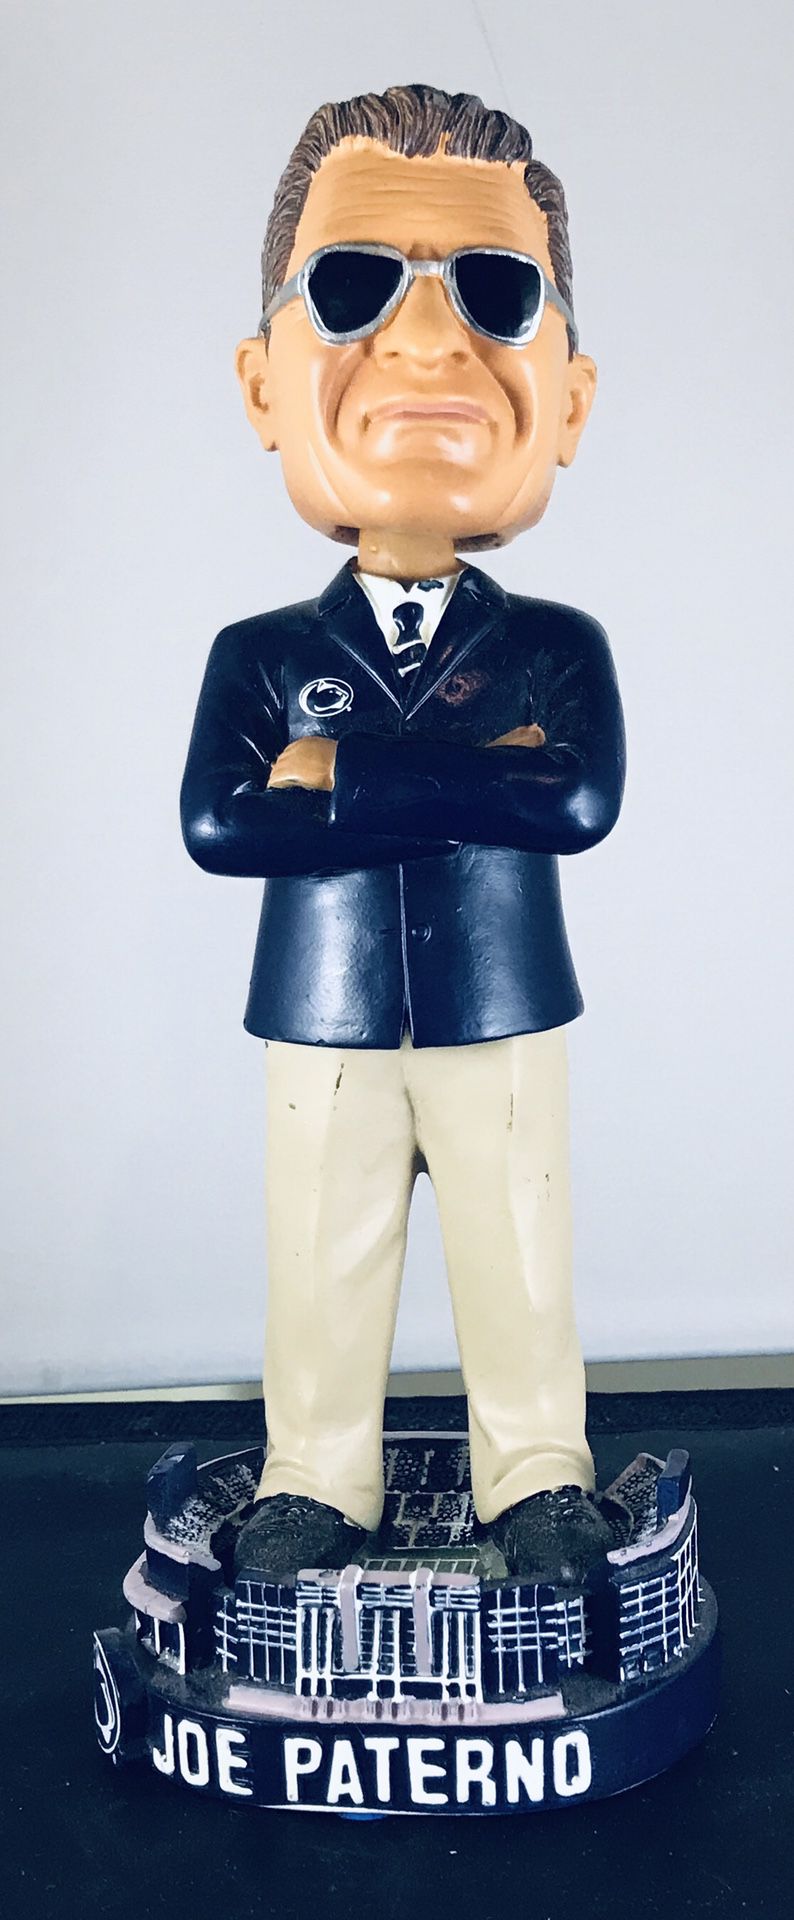 Joe Paterno Penn State limited edition bobblehead, only 5,000 made!